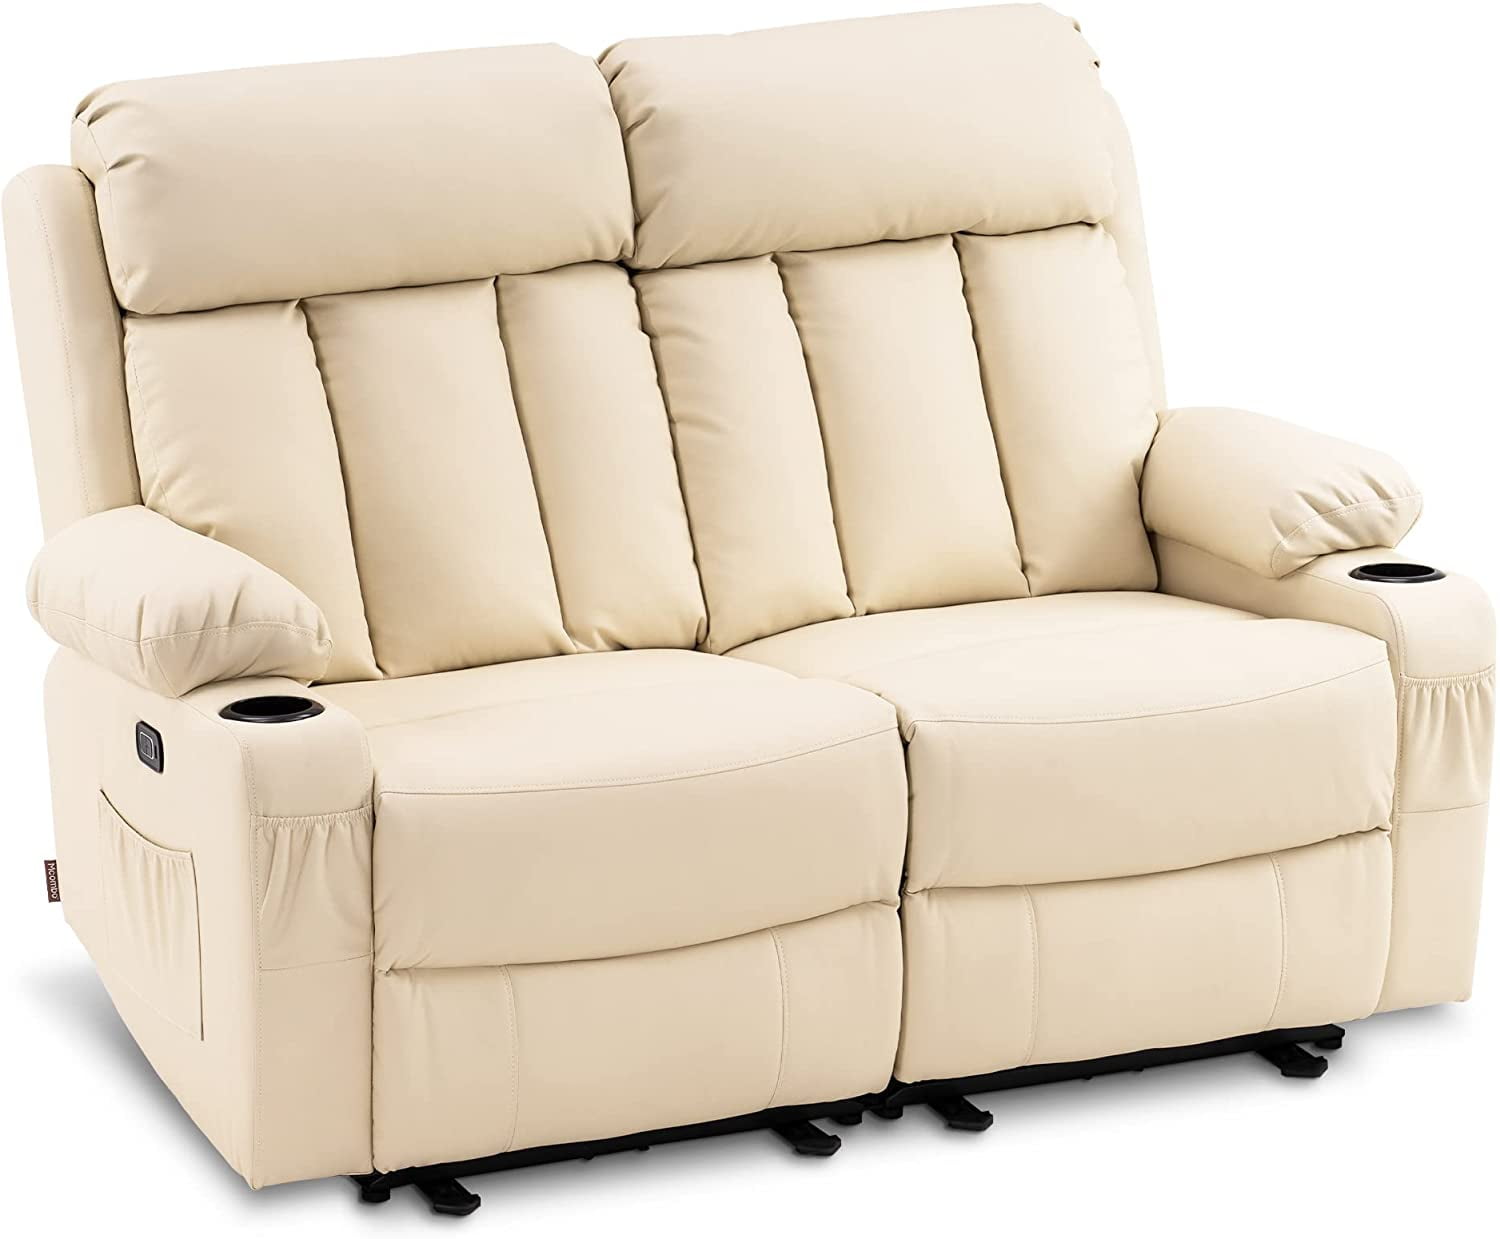 Electric Couch And Loveseat | tunersread.com